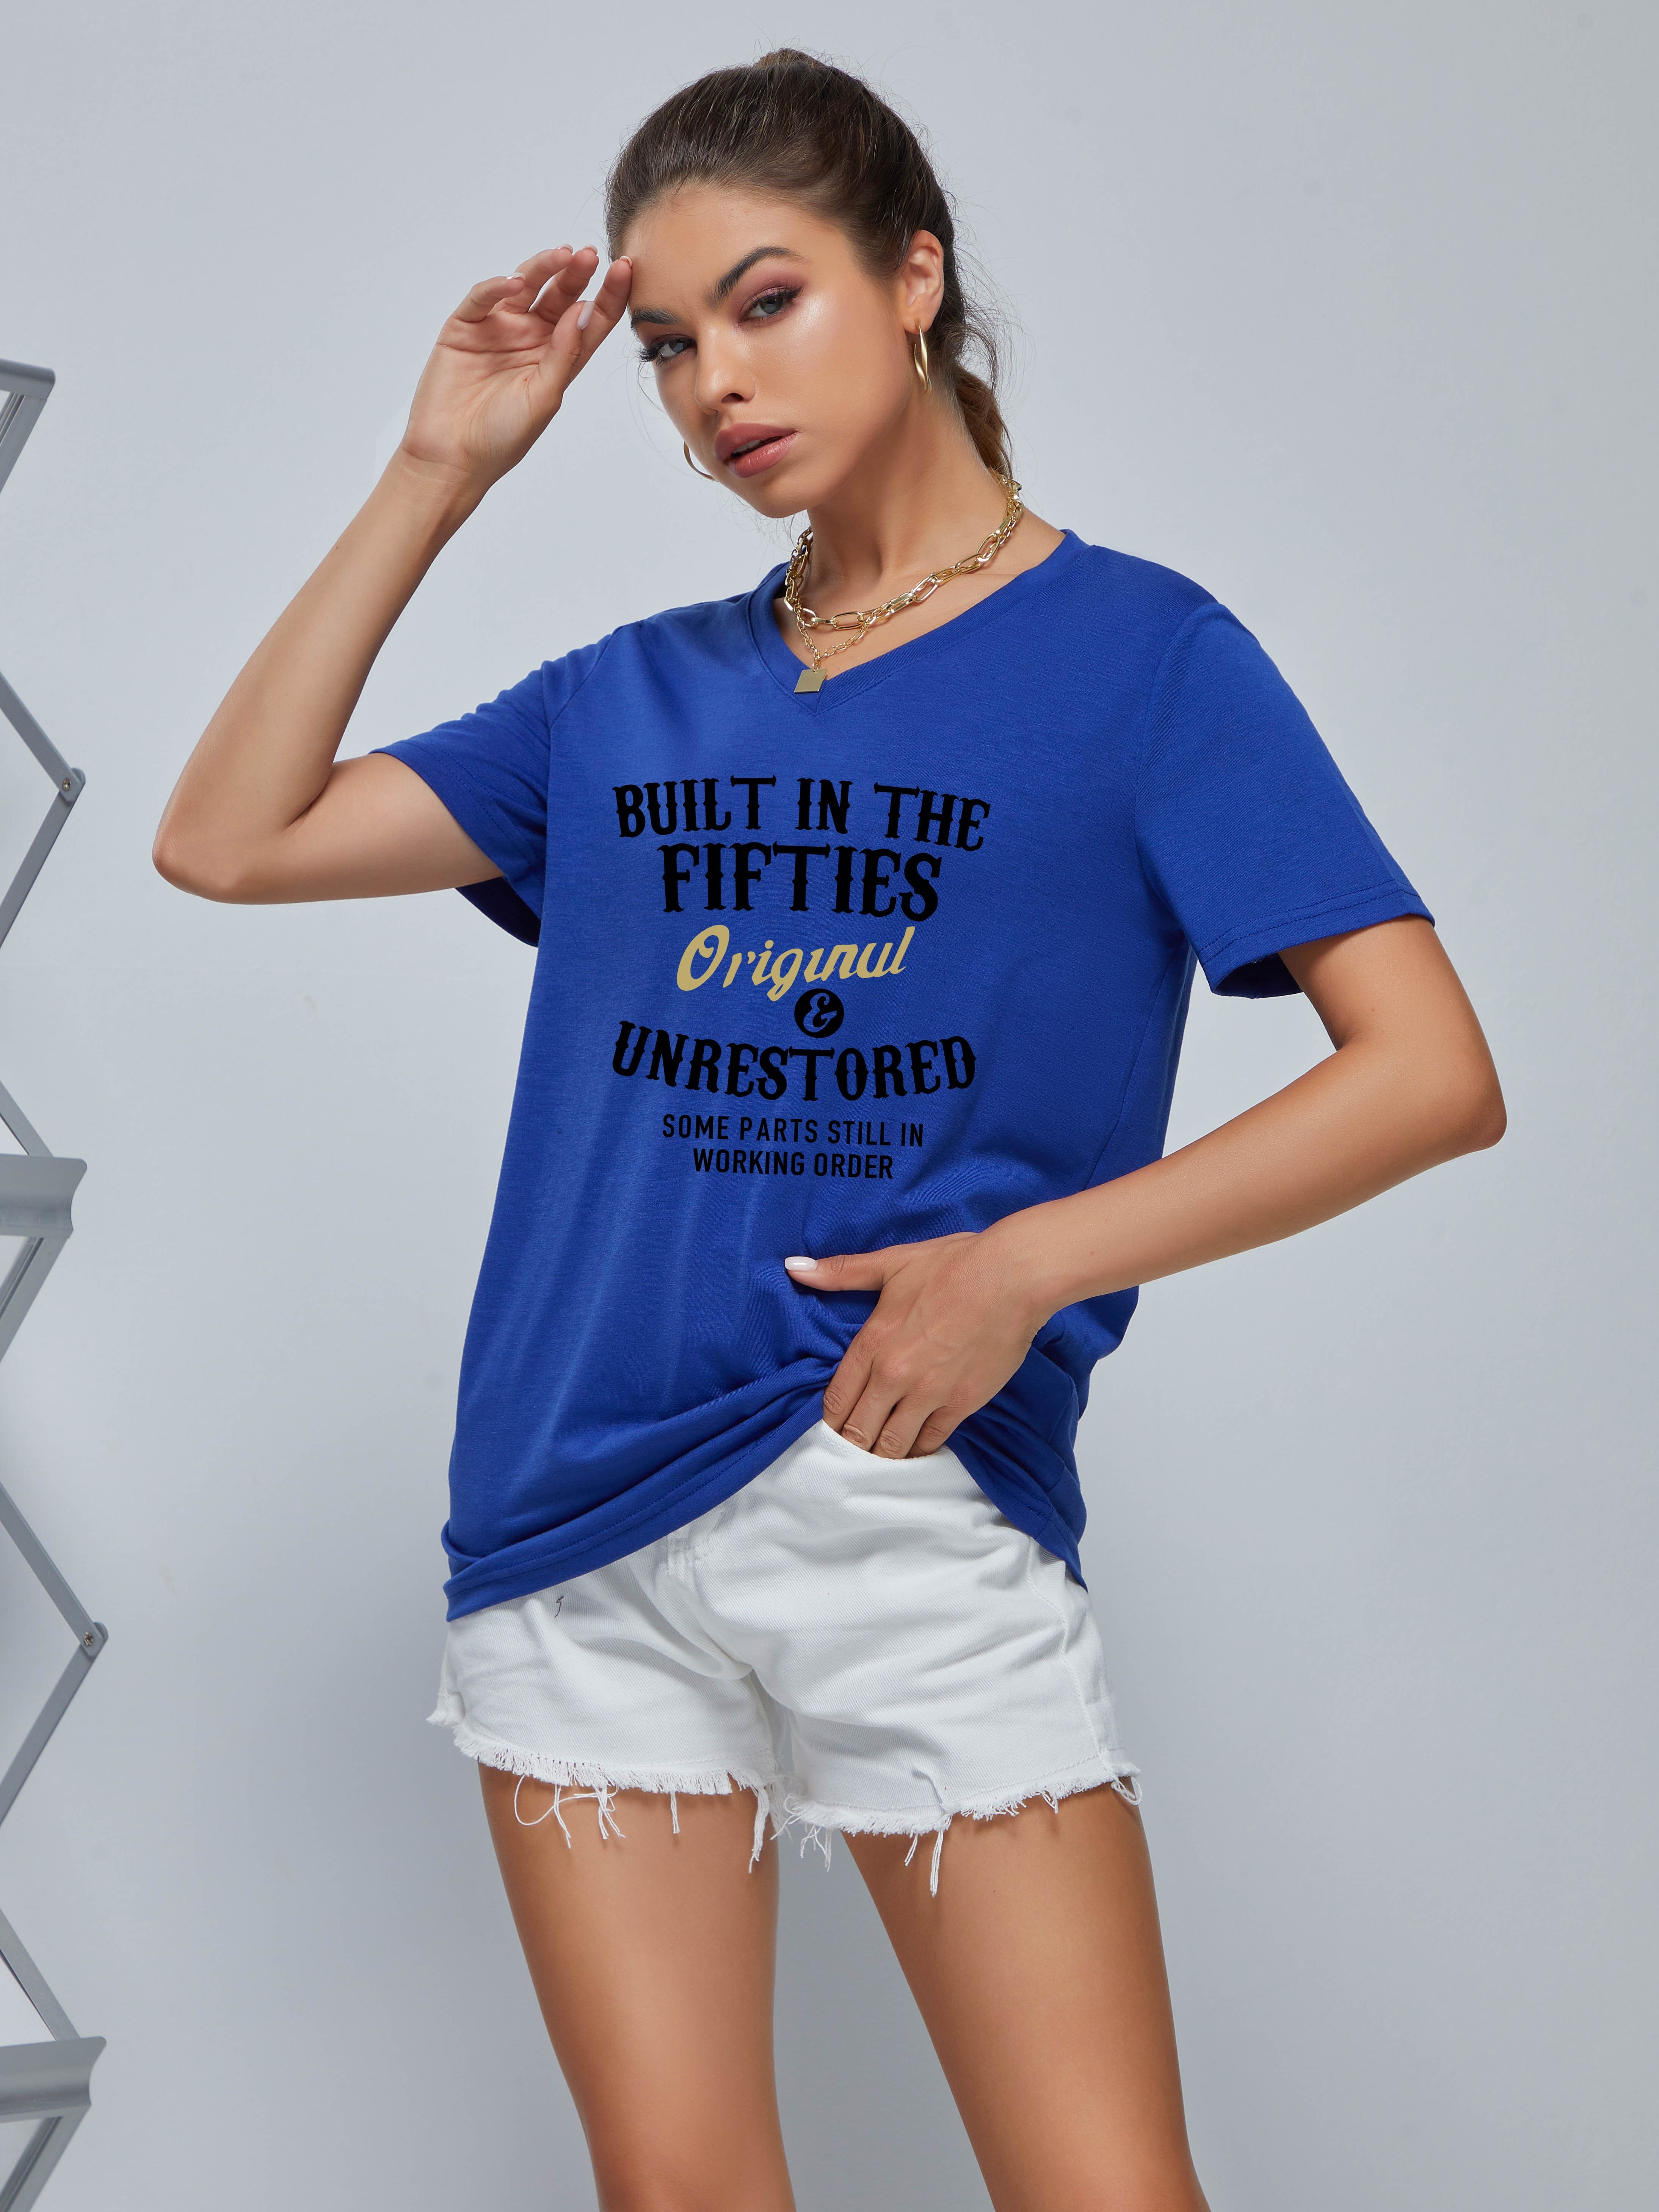 Fitted sports T-shirt - Women's fashion